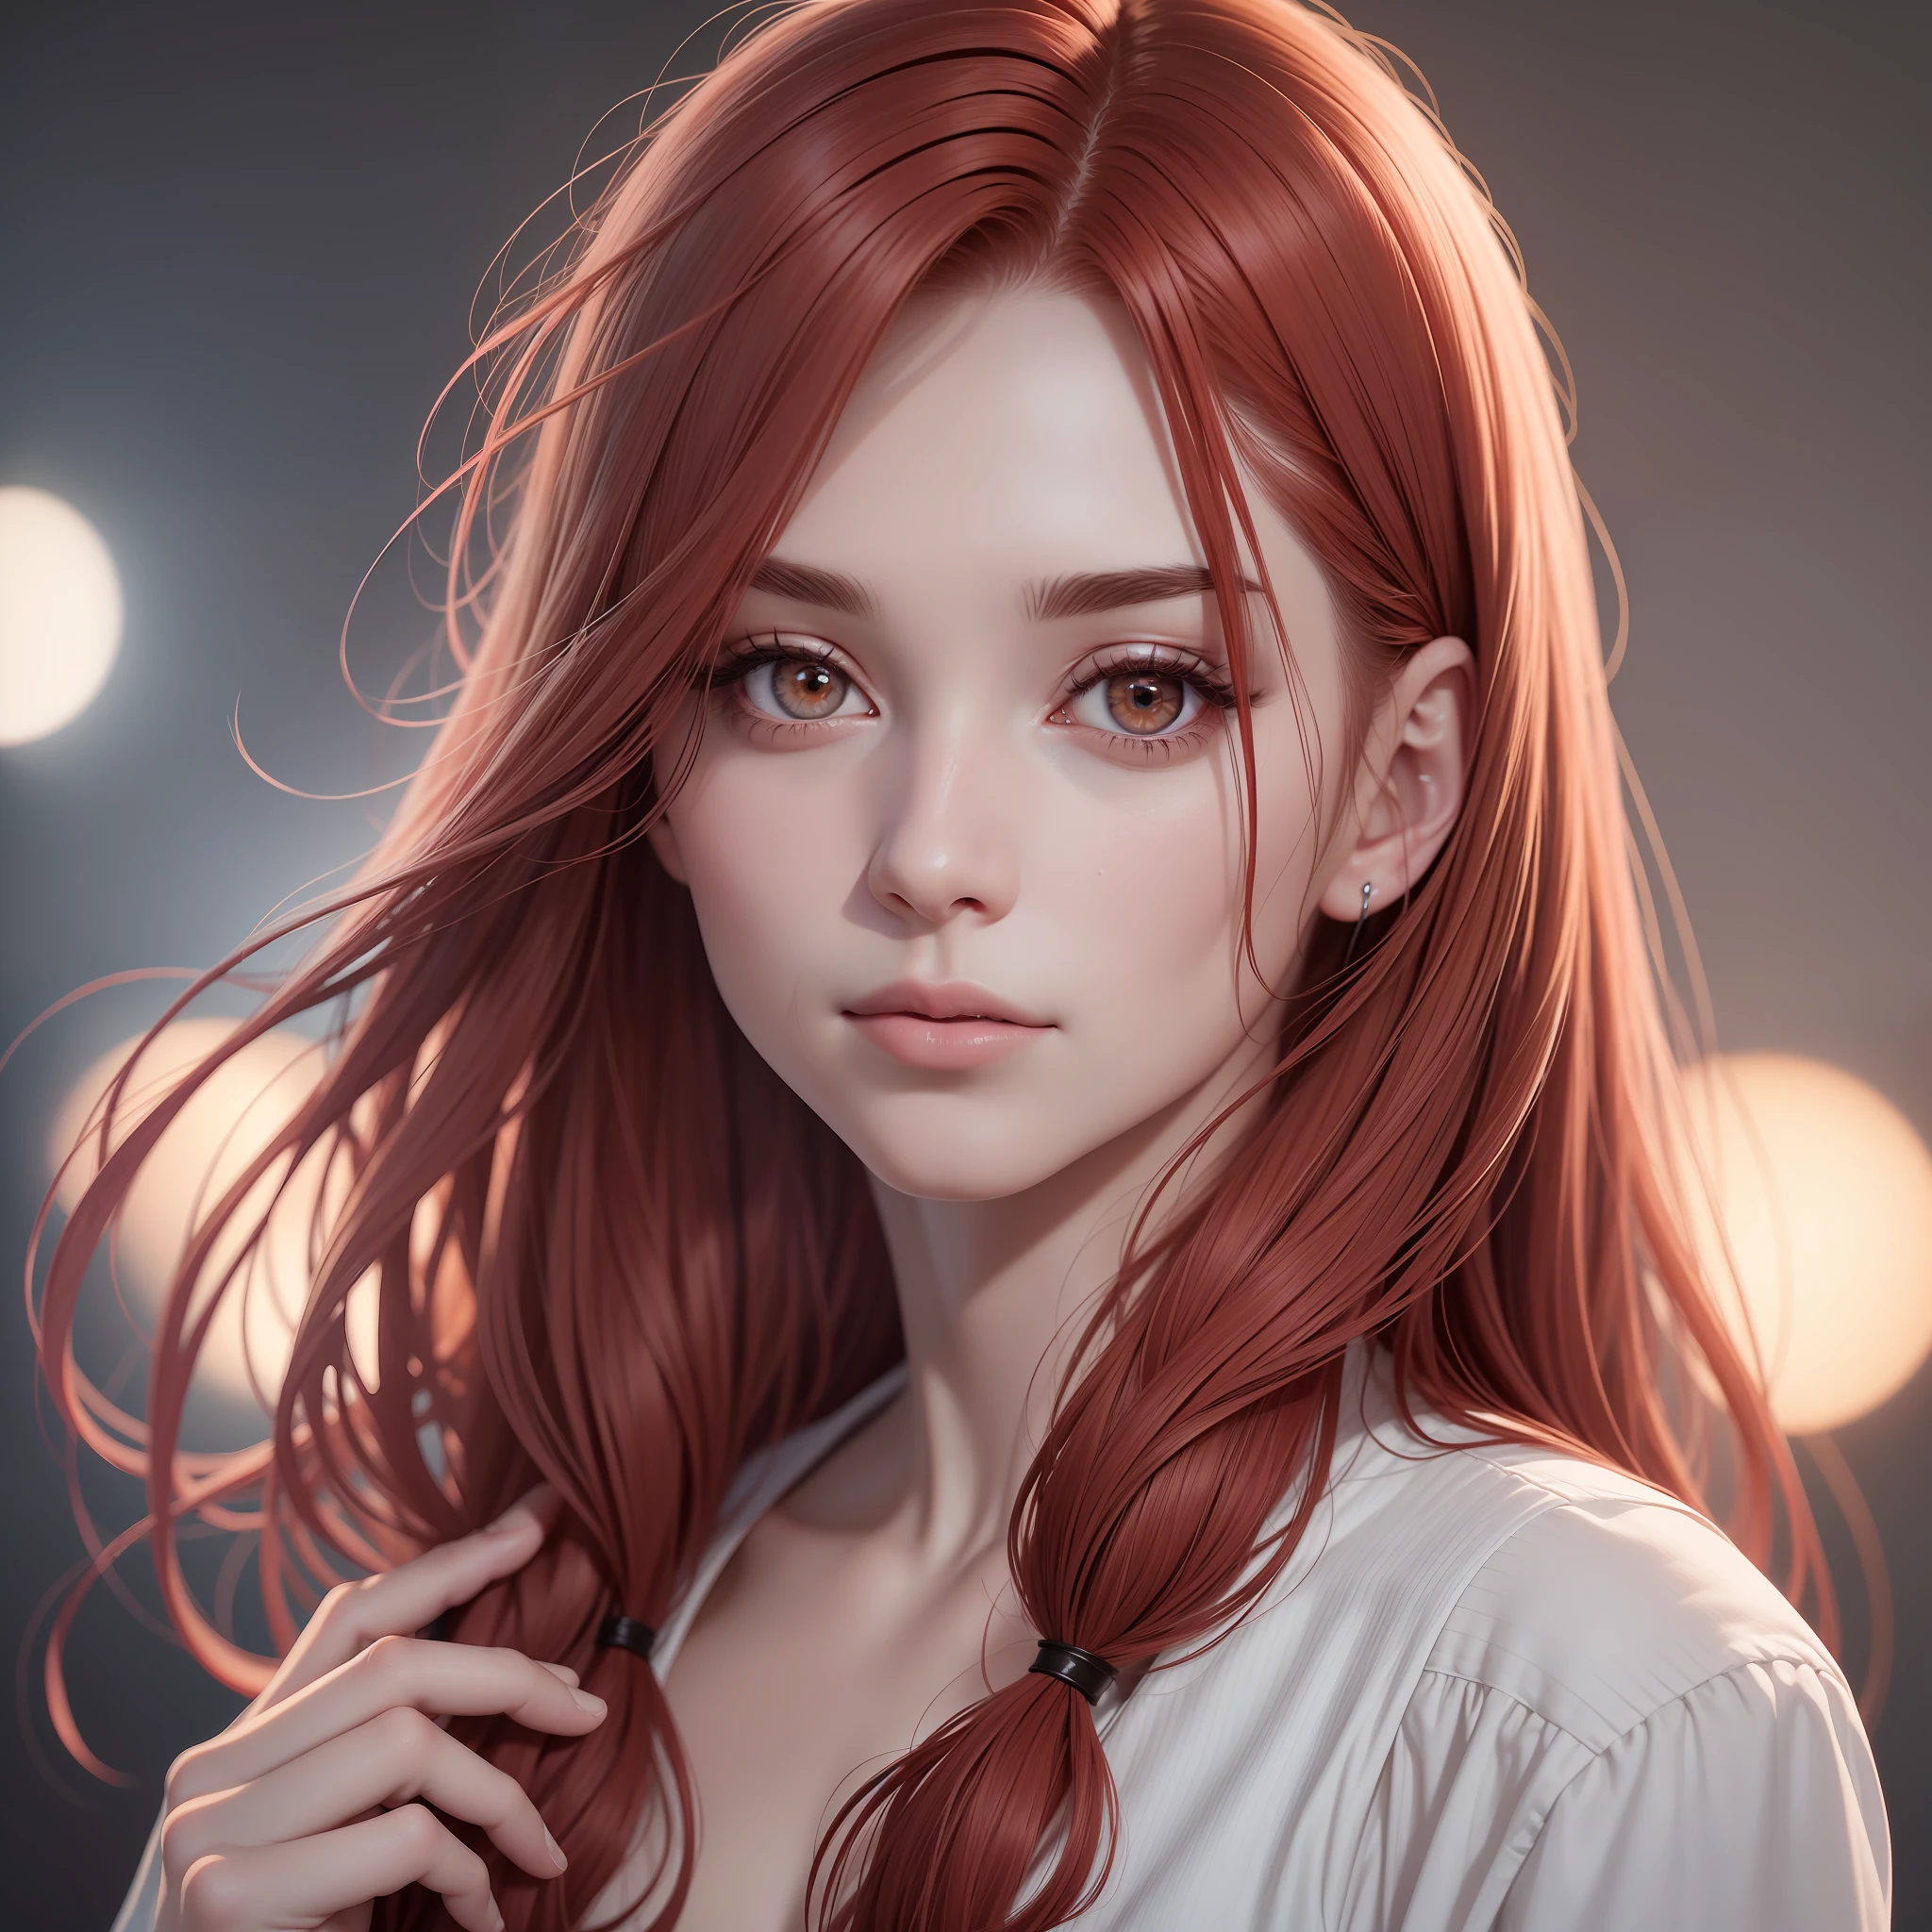 Woman with blood-colored red hair, brown eyes. Incredibly realistic. Stunning digital illustration, realistic art style, 4k realistic digital art, beautiful digital illustration, 8k high quality detailed art, beautiful digital art, glowing wlop skin, photorealistic art style, realistic realism art style